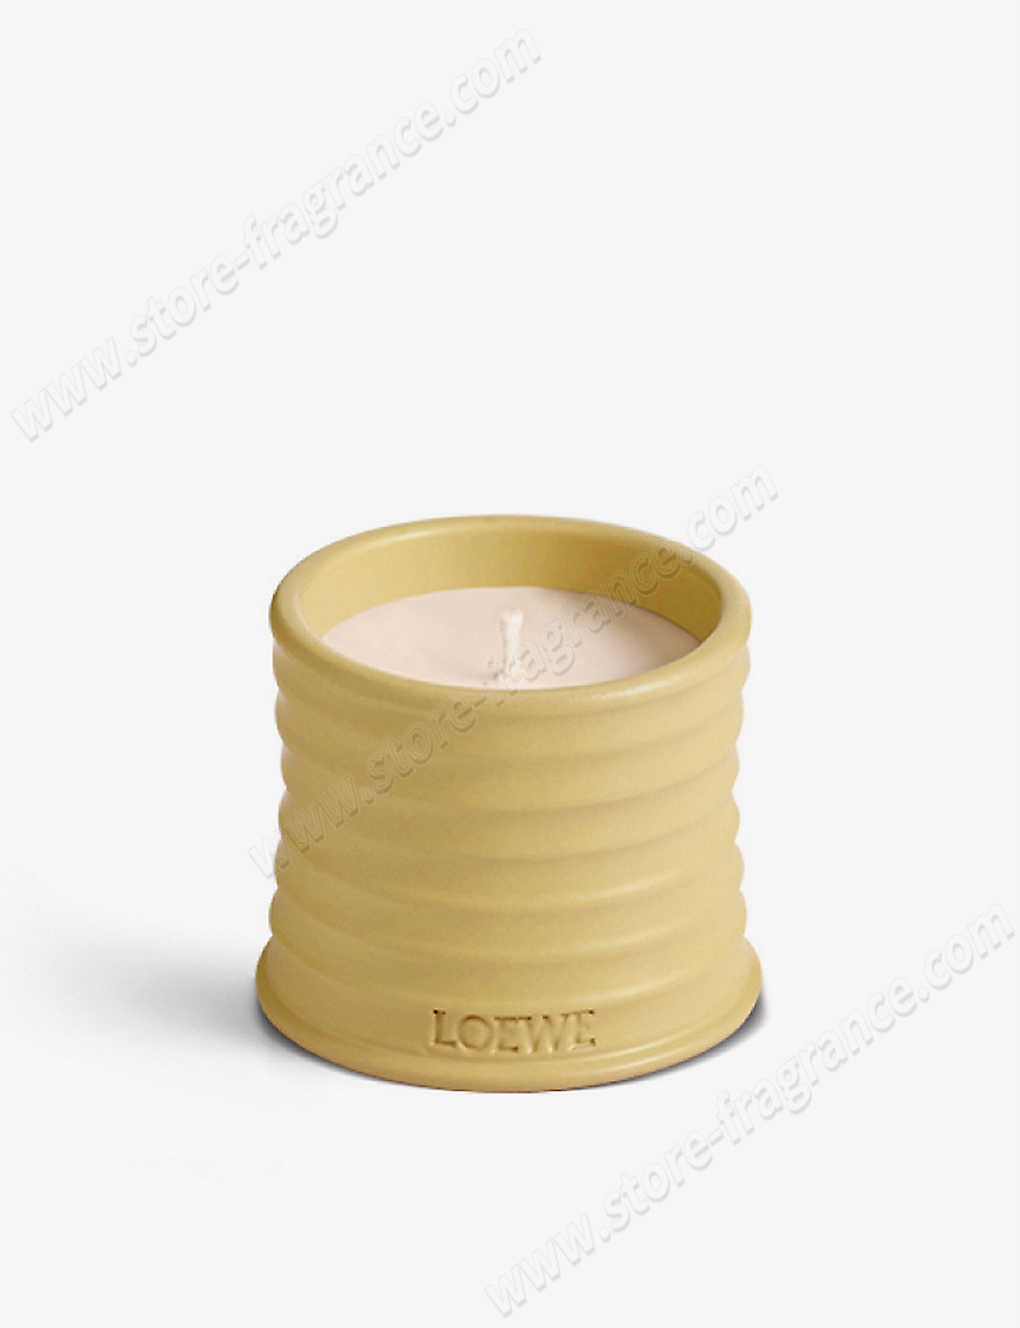 LOEWE/Honeysuckle scented candle 170g ✿ Discount Store - -0